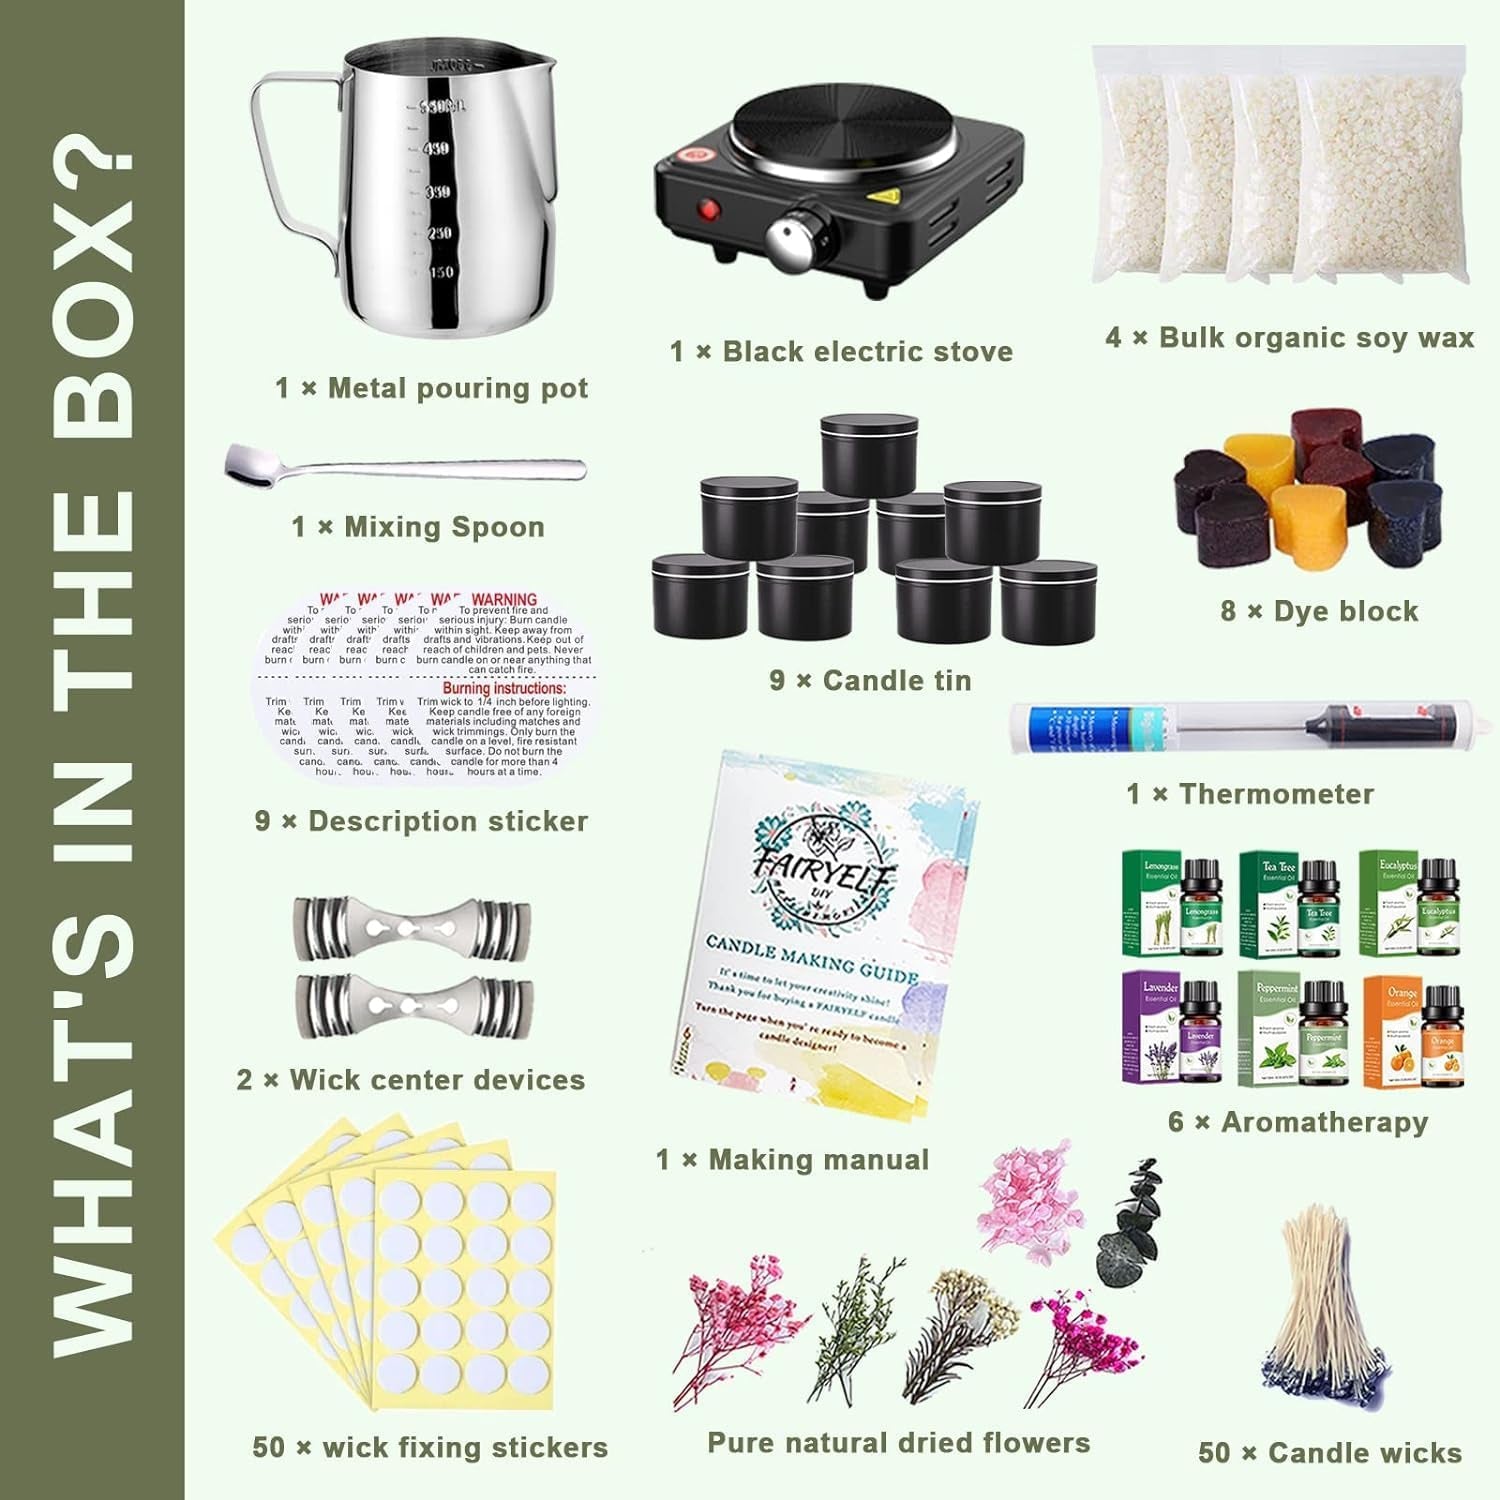 Candle Making Kit with Wax Melter, Complete Candle Making Supplies, Soy Candle Wax Kit for Kids, Beginners, Adults, Including Electronic Stove, Soy Wax, Melting Pot, Rich Scents and Dyes